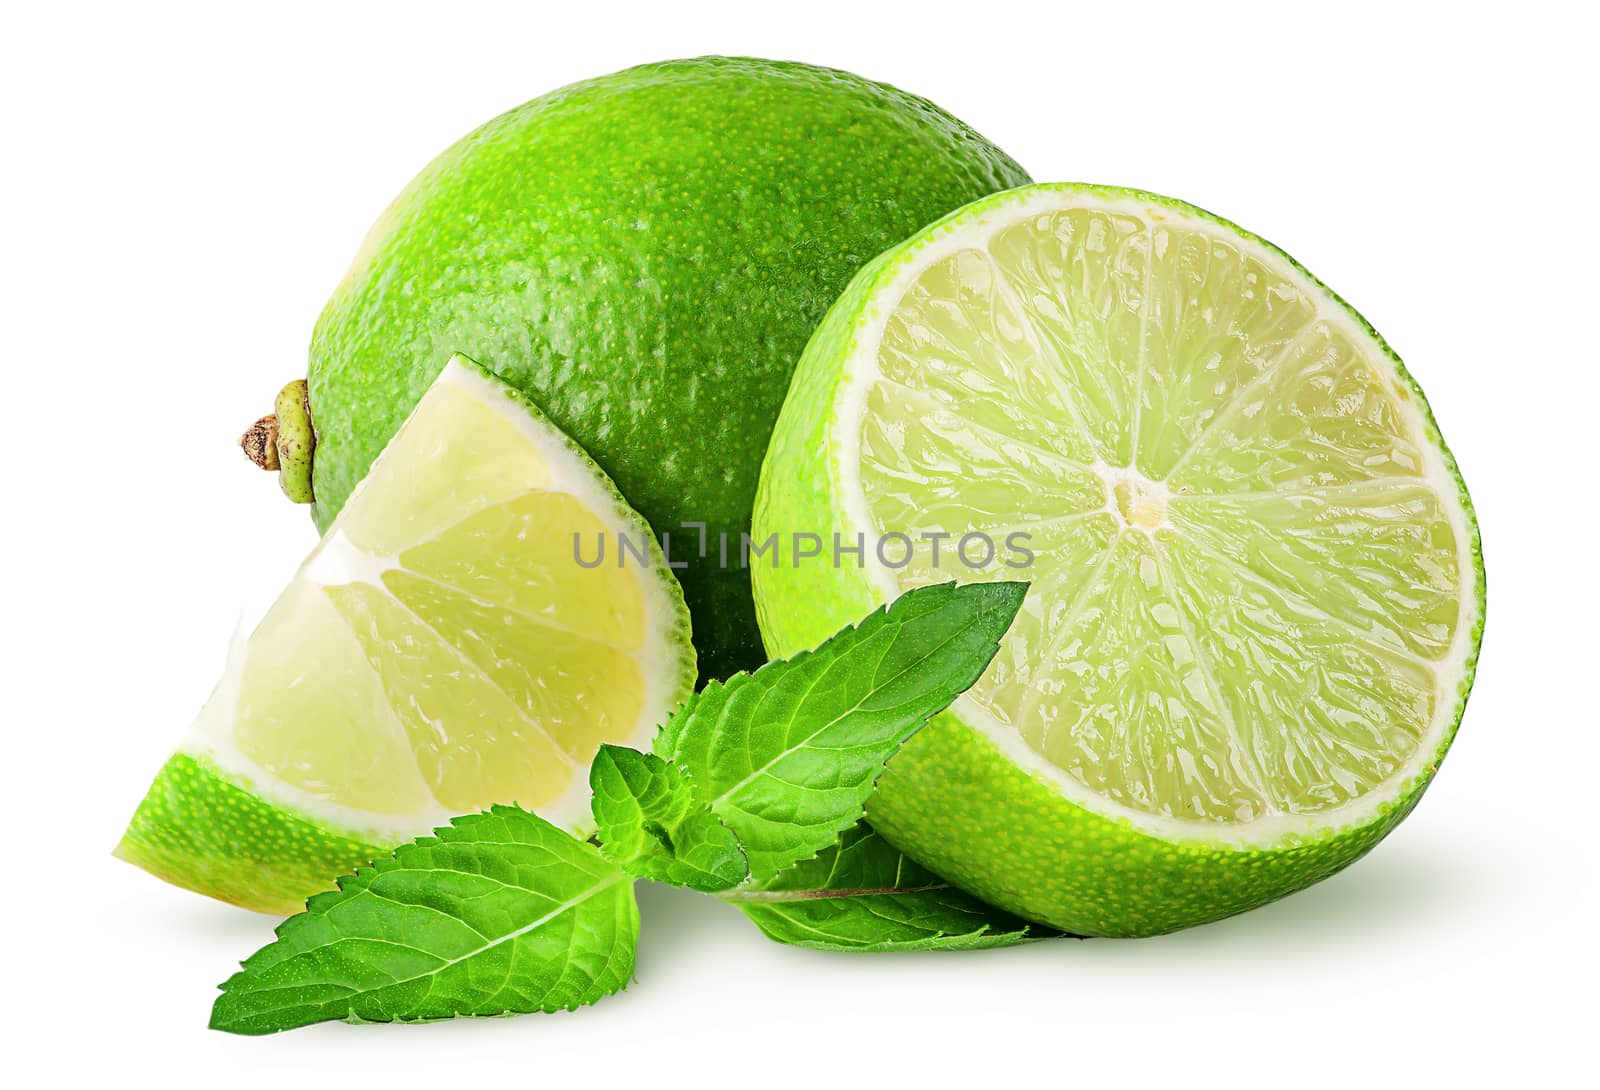 Whole and few pieces of lime with mint by Cipariss